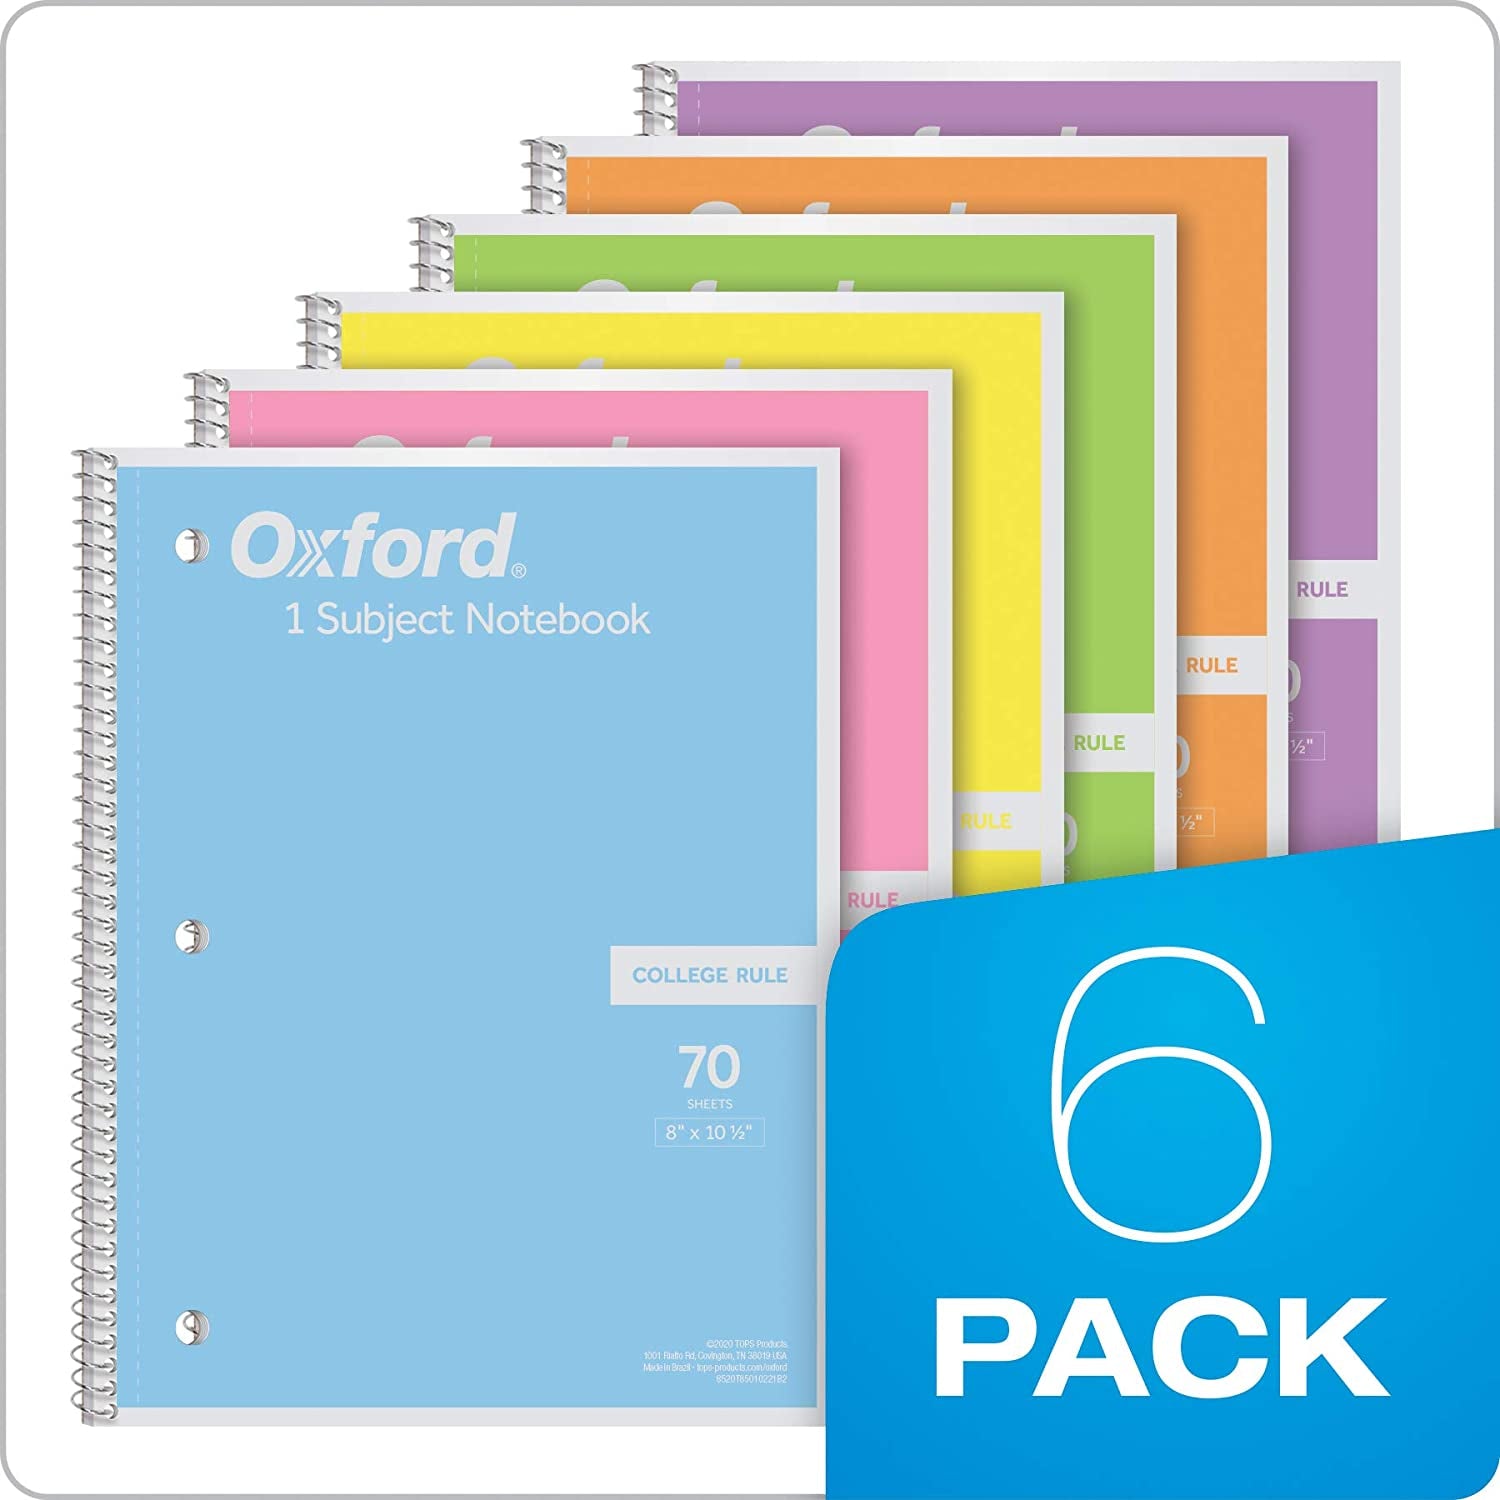 Spiral Notebook, 1 Subject, College Ruled Paper, 8 X 10-1/2 Inch, Pastel Pink, Orange, Yellow, Green, Blue and Purple, 70 Sheets (63756), Set of 6